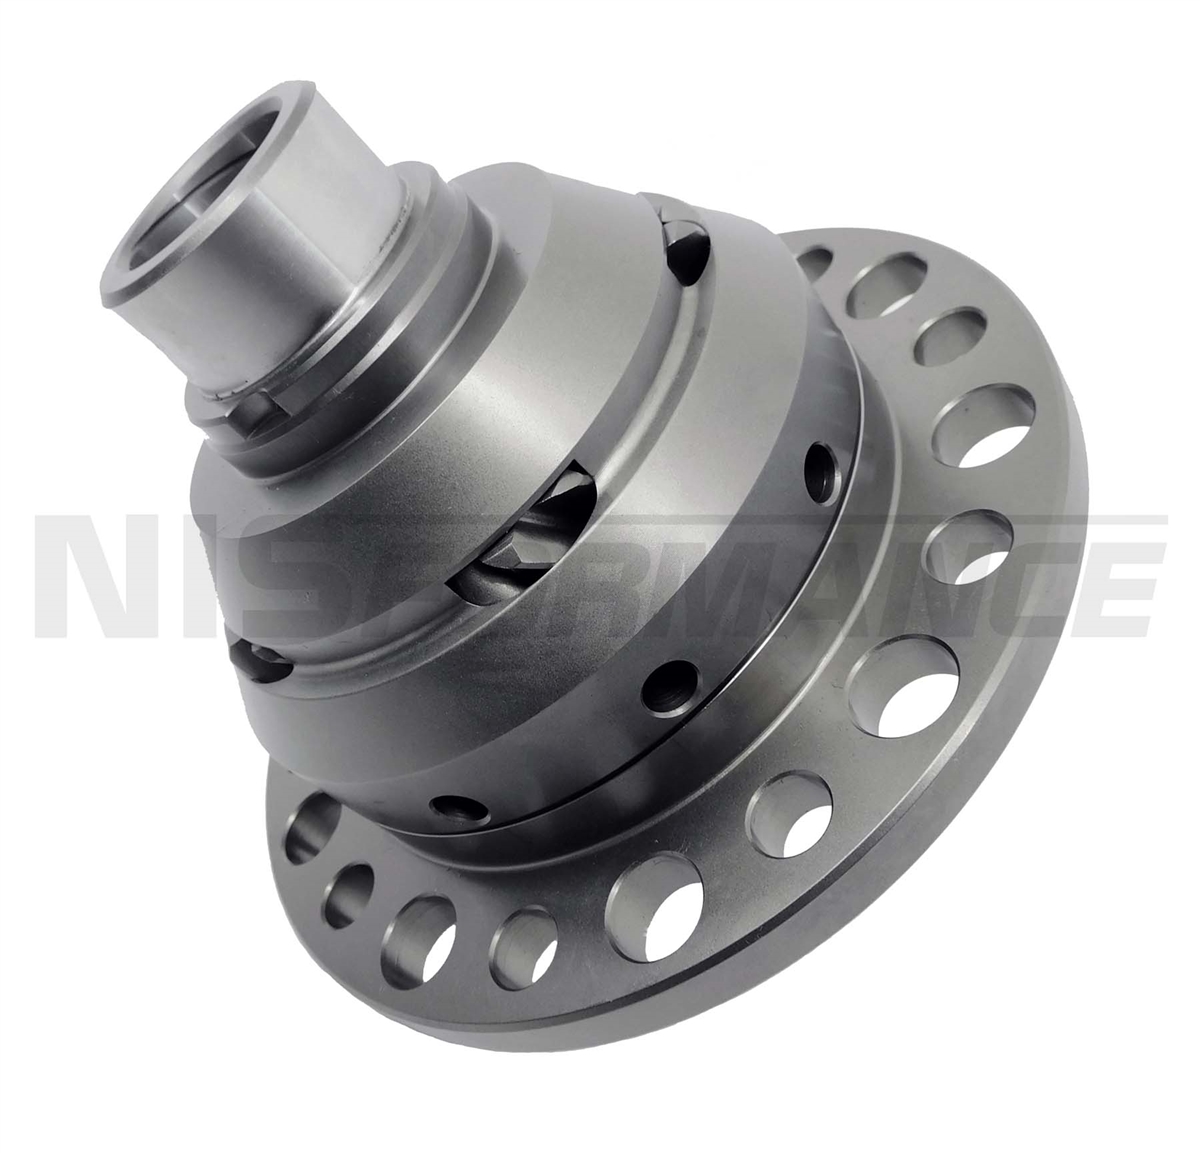 NISformance Helical Limited Slip Differential (HLSD) F51/F52